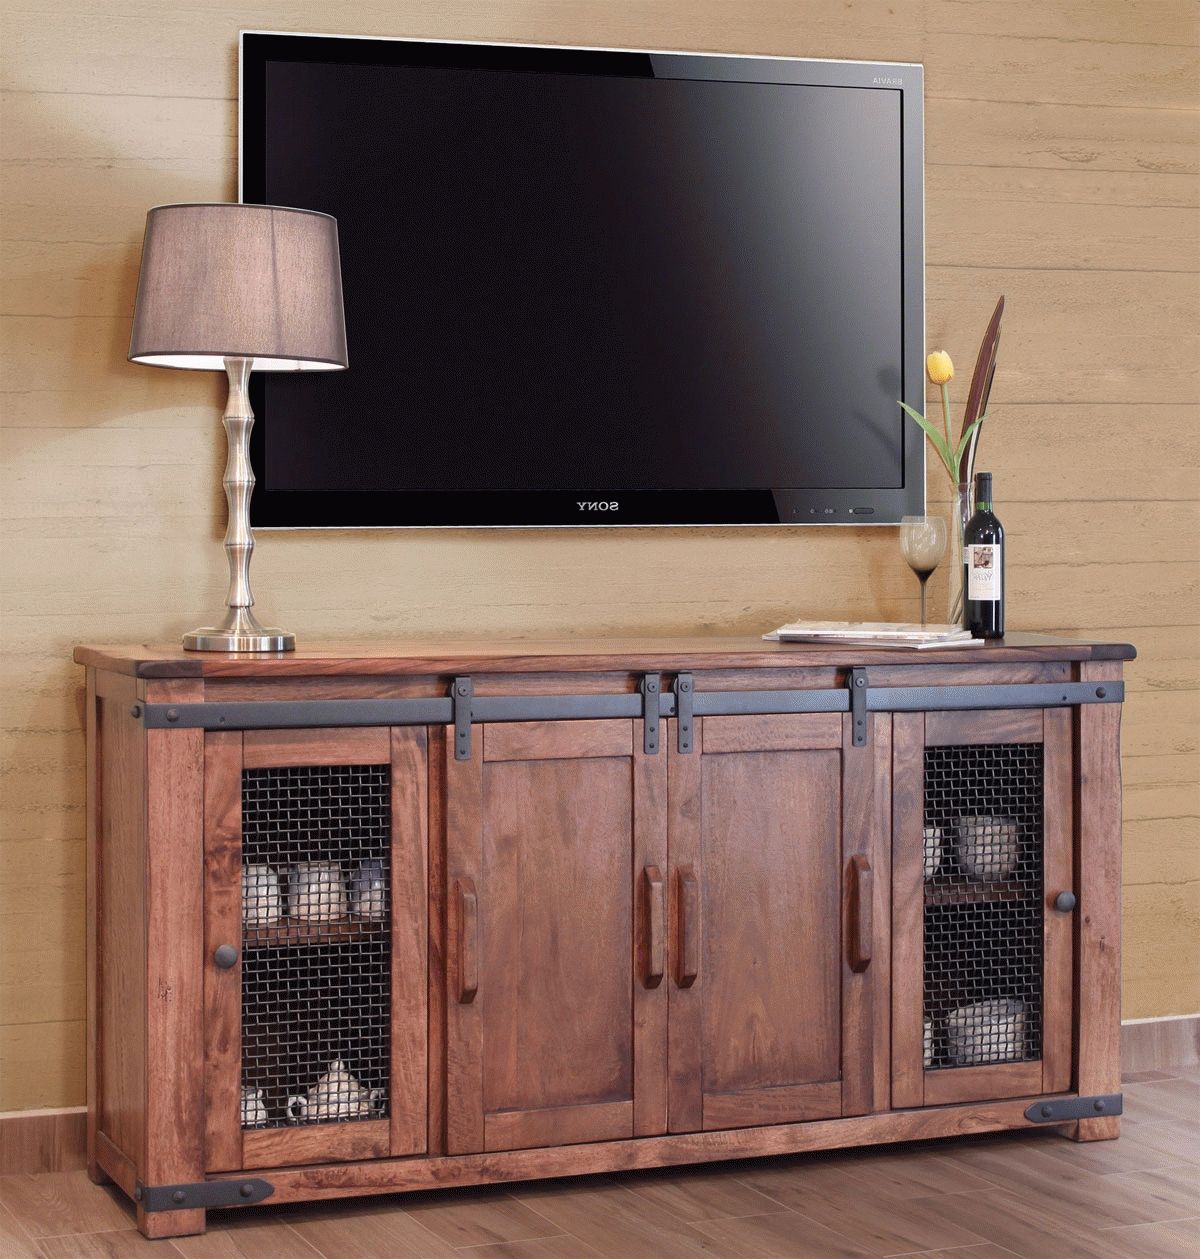 Rustic Tv Stand, Wood Tv Stand, Pine Tv Stand For Rustic Pine Tv Cabinets (View 3 of 20)